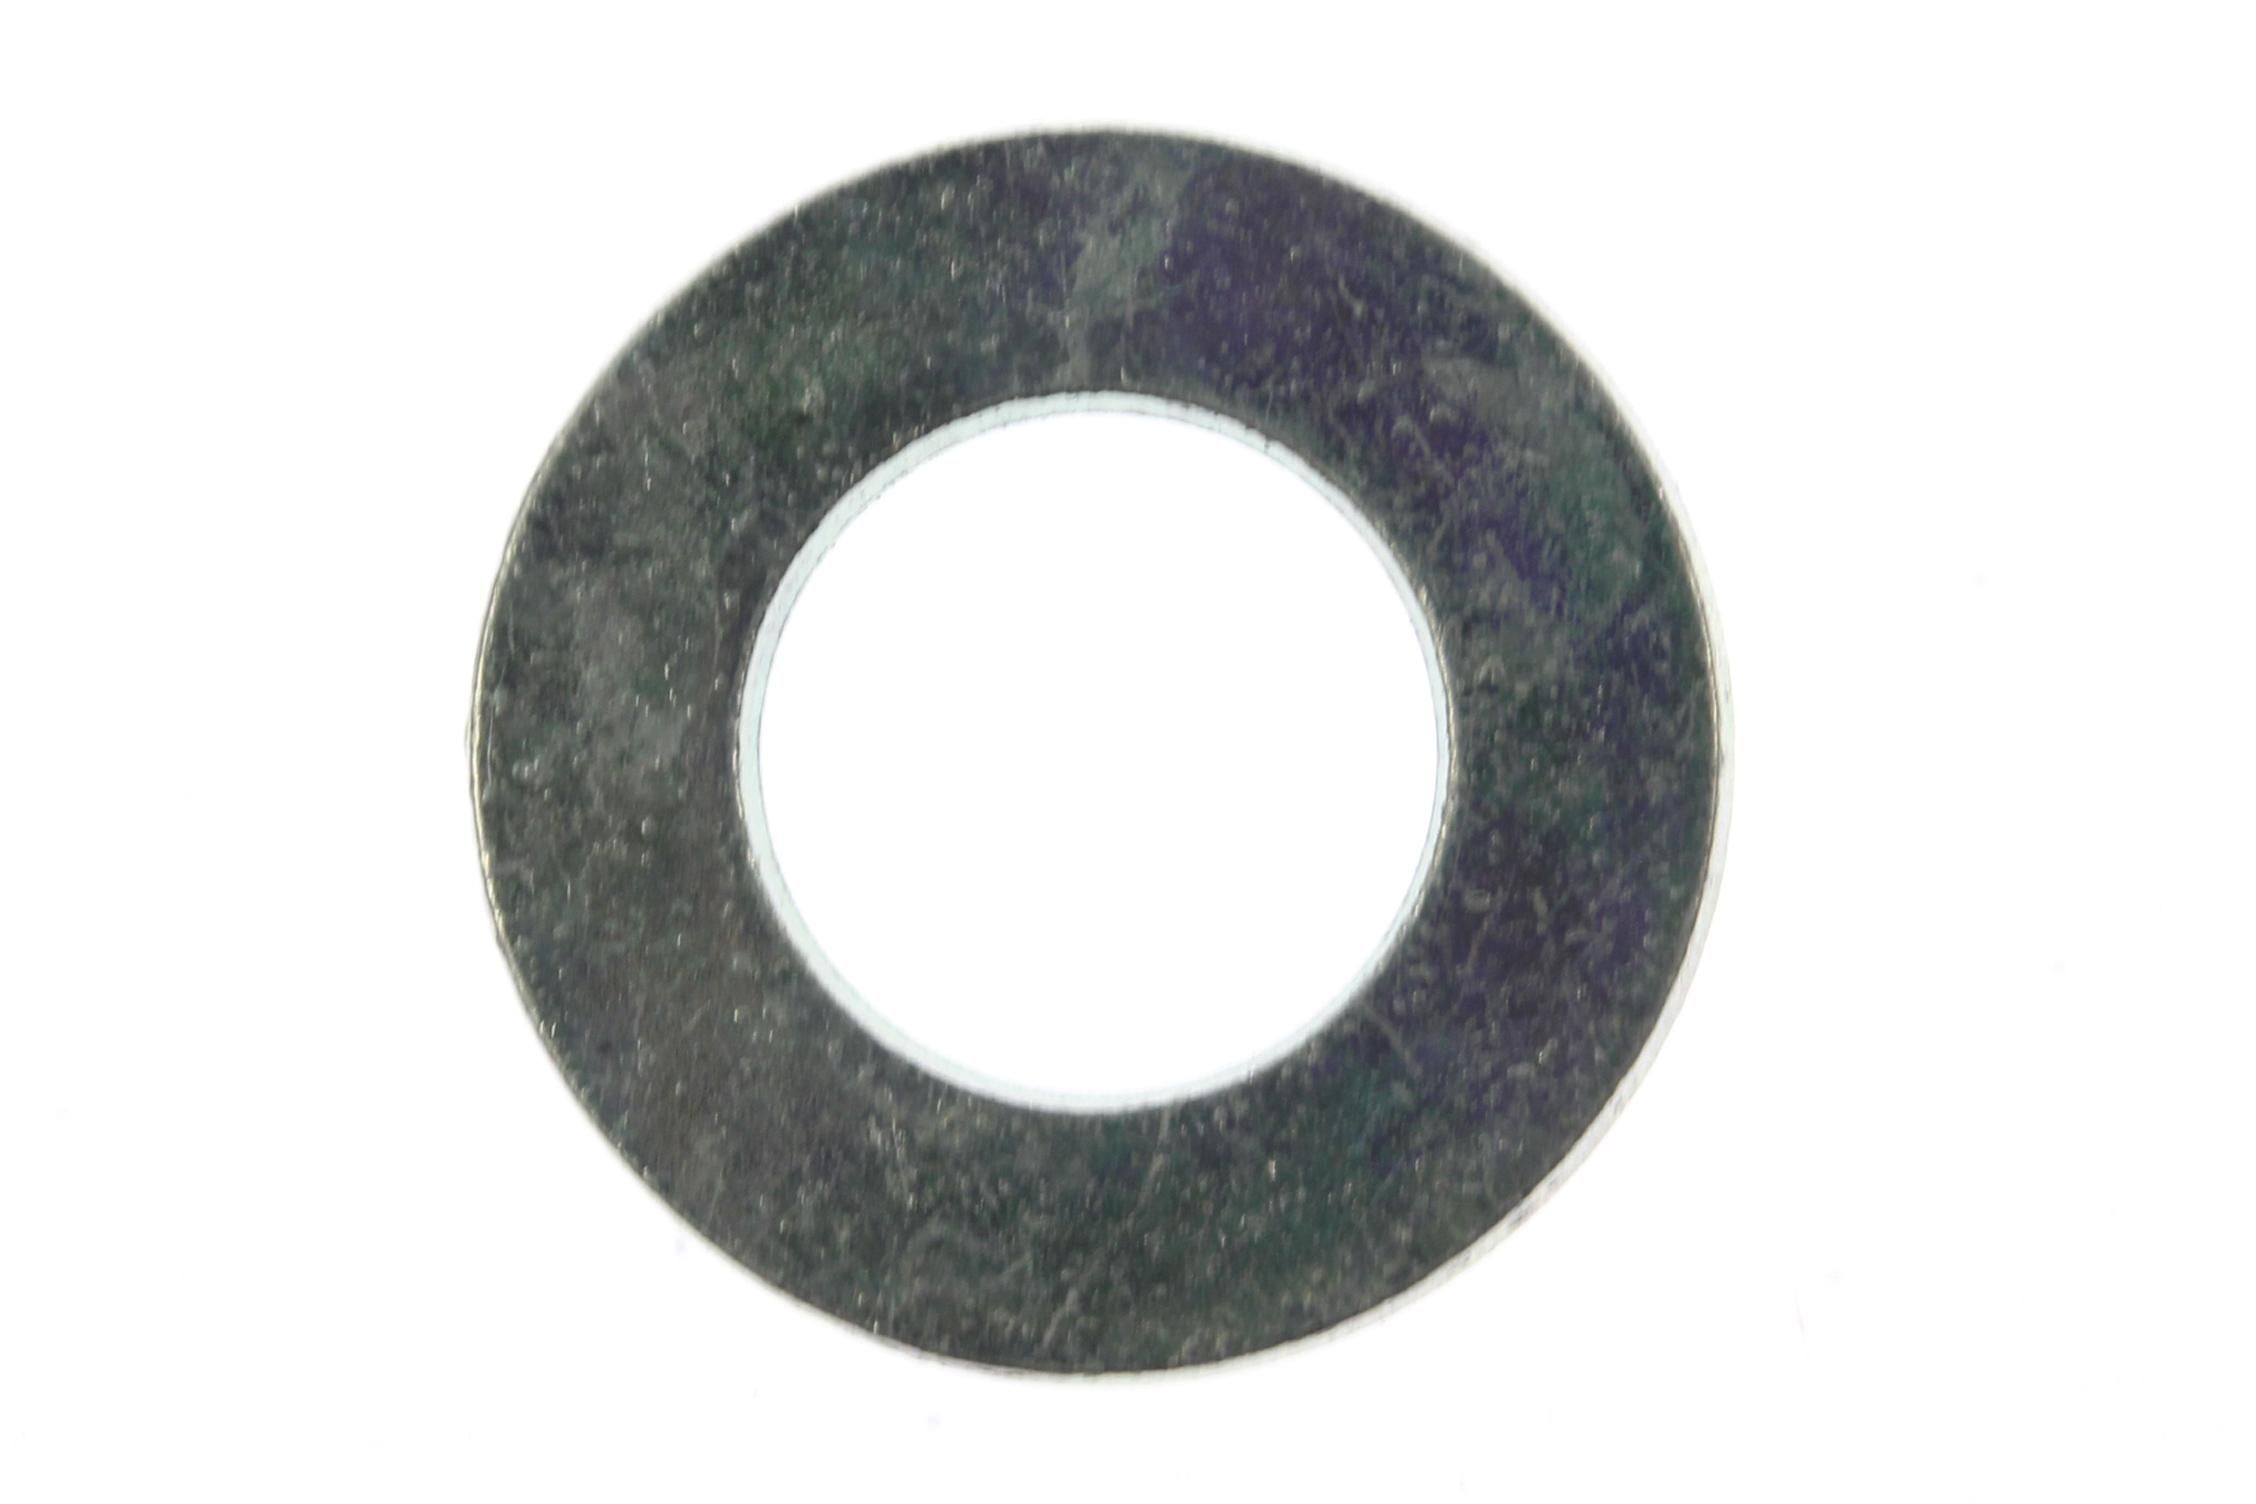 90501-HL3-A00 WASHER